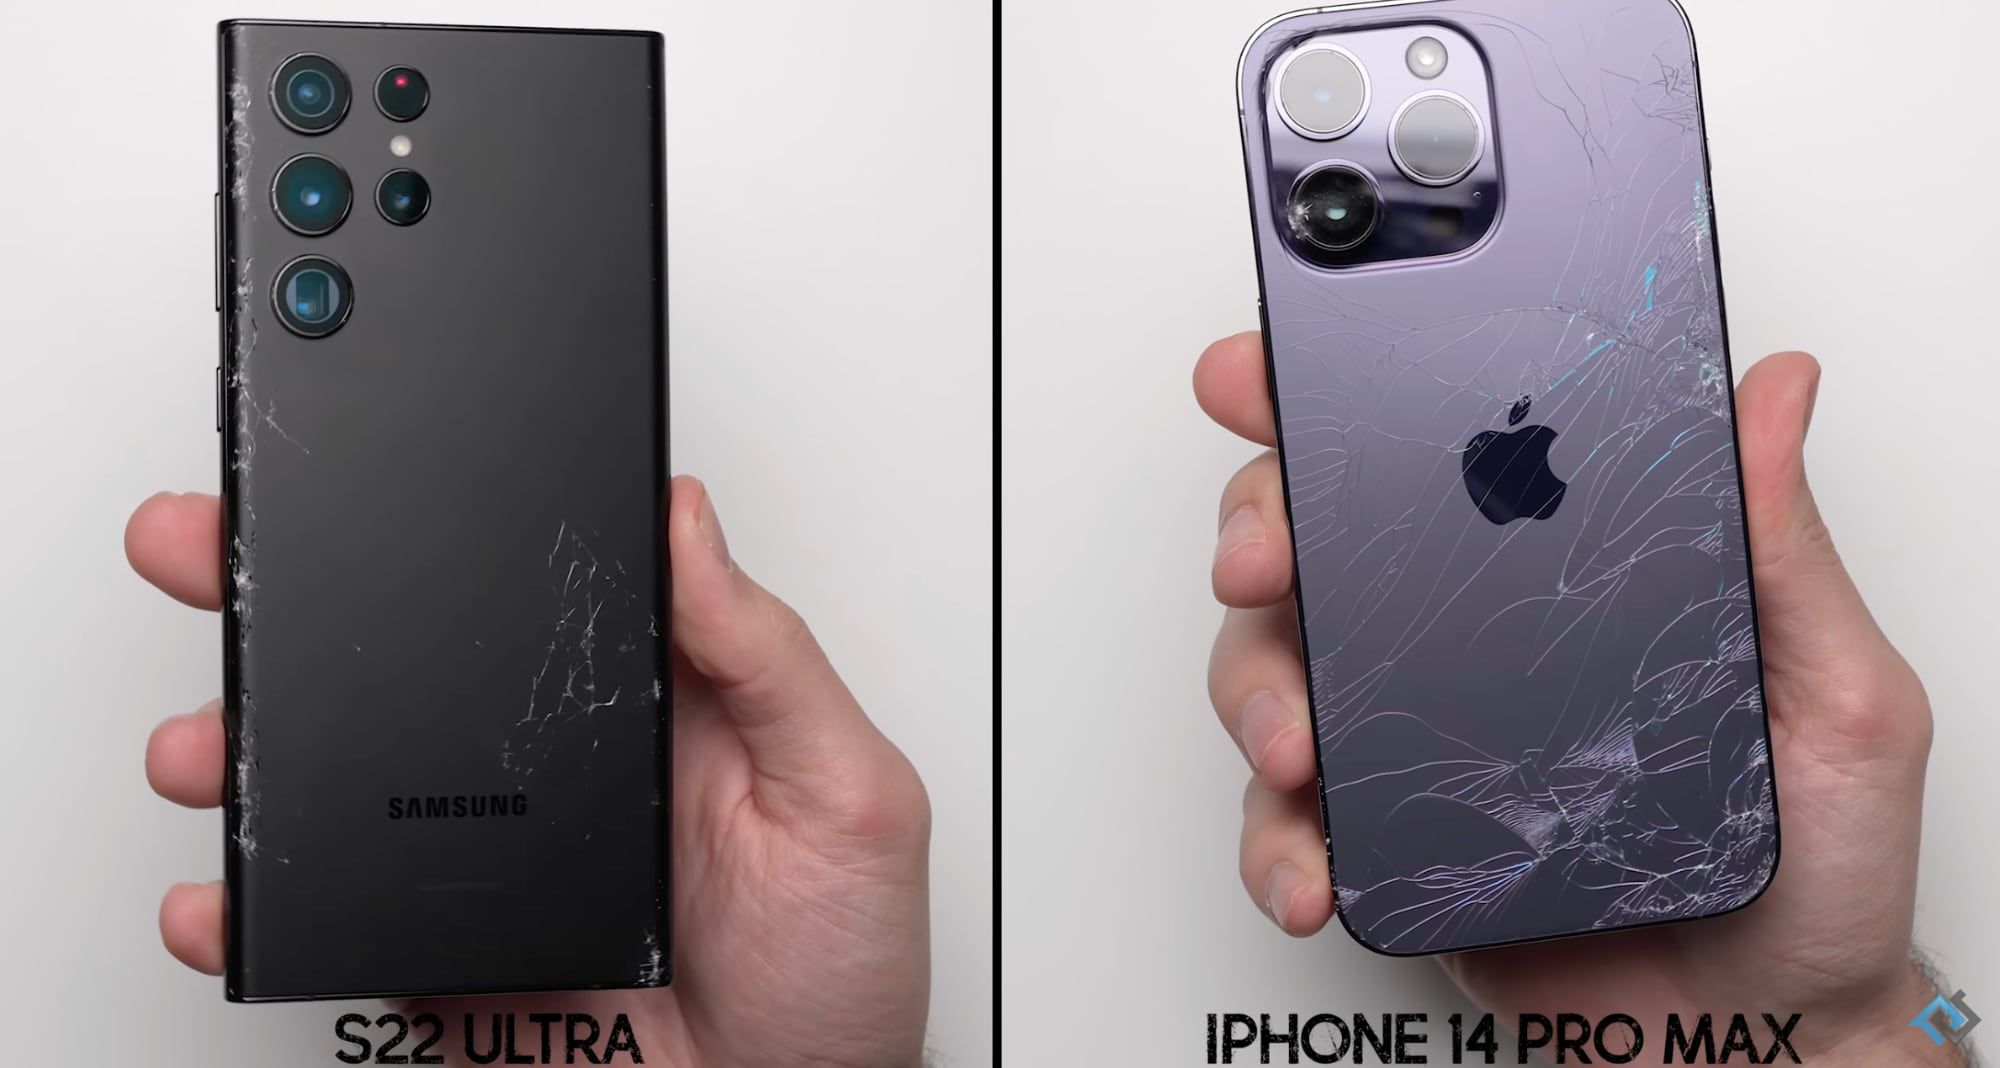 Iphone 14 Pro Max Pitted Against Samsung Galaxy S22 Ultra In Drop Test Showdown Macrumors